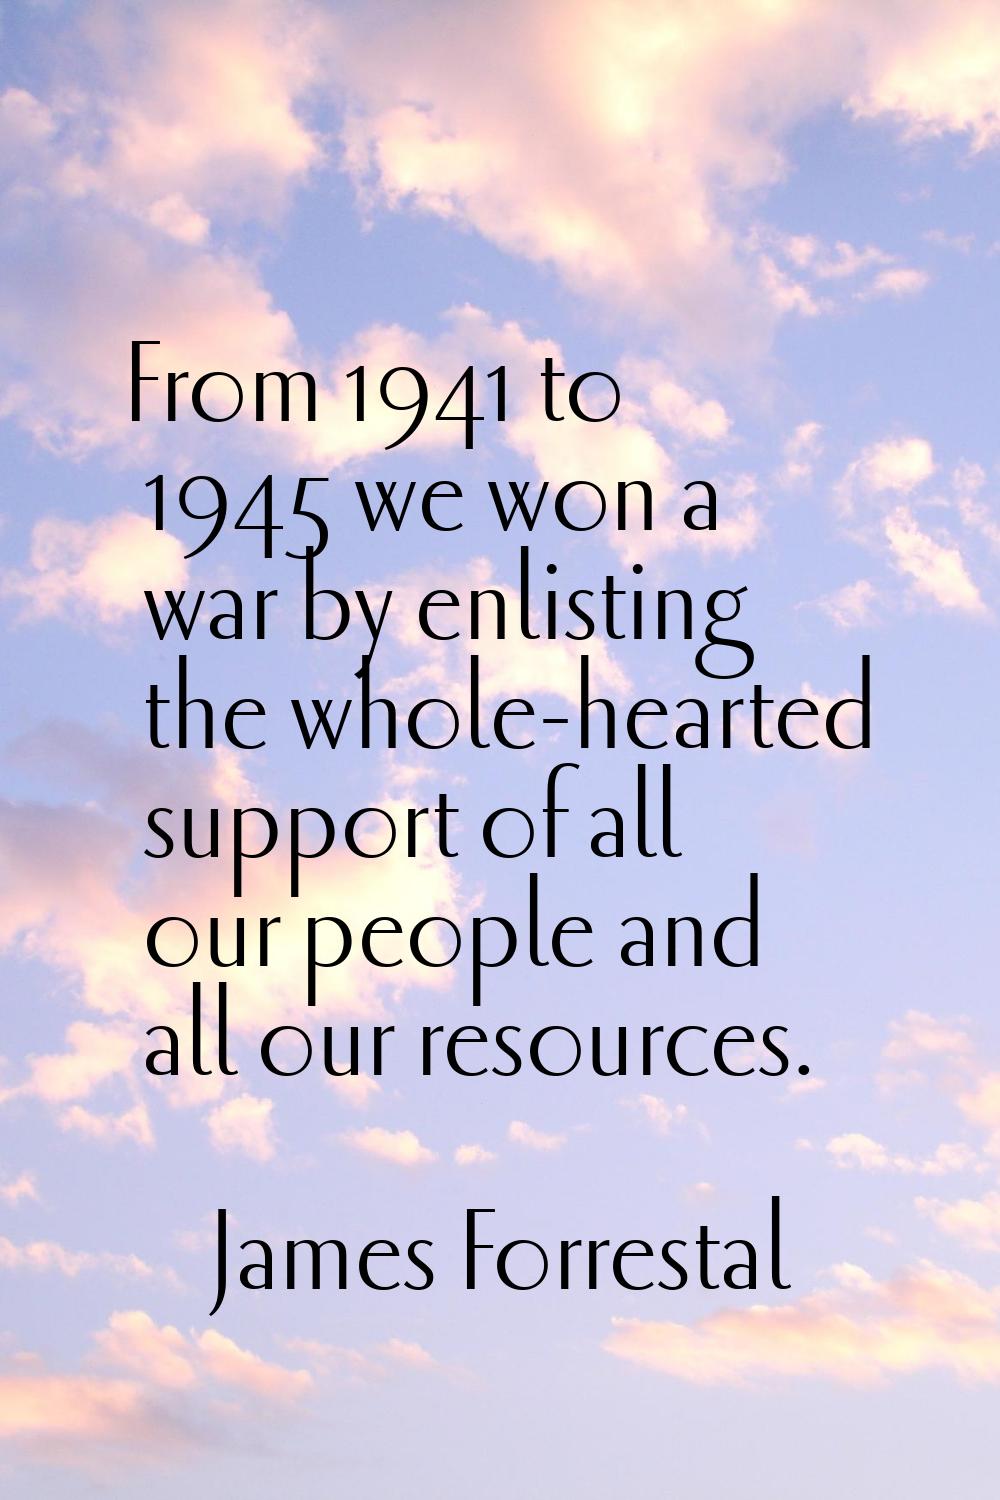 From 1941 to 1945 we won a war by enlisting the whole-hearted support of all our people and all our